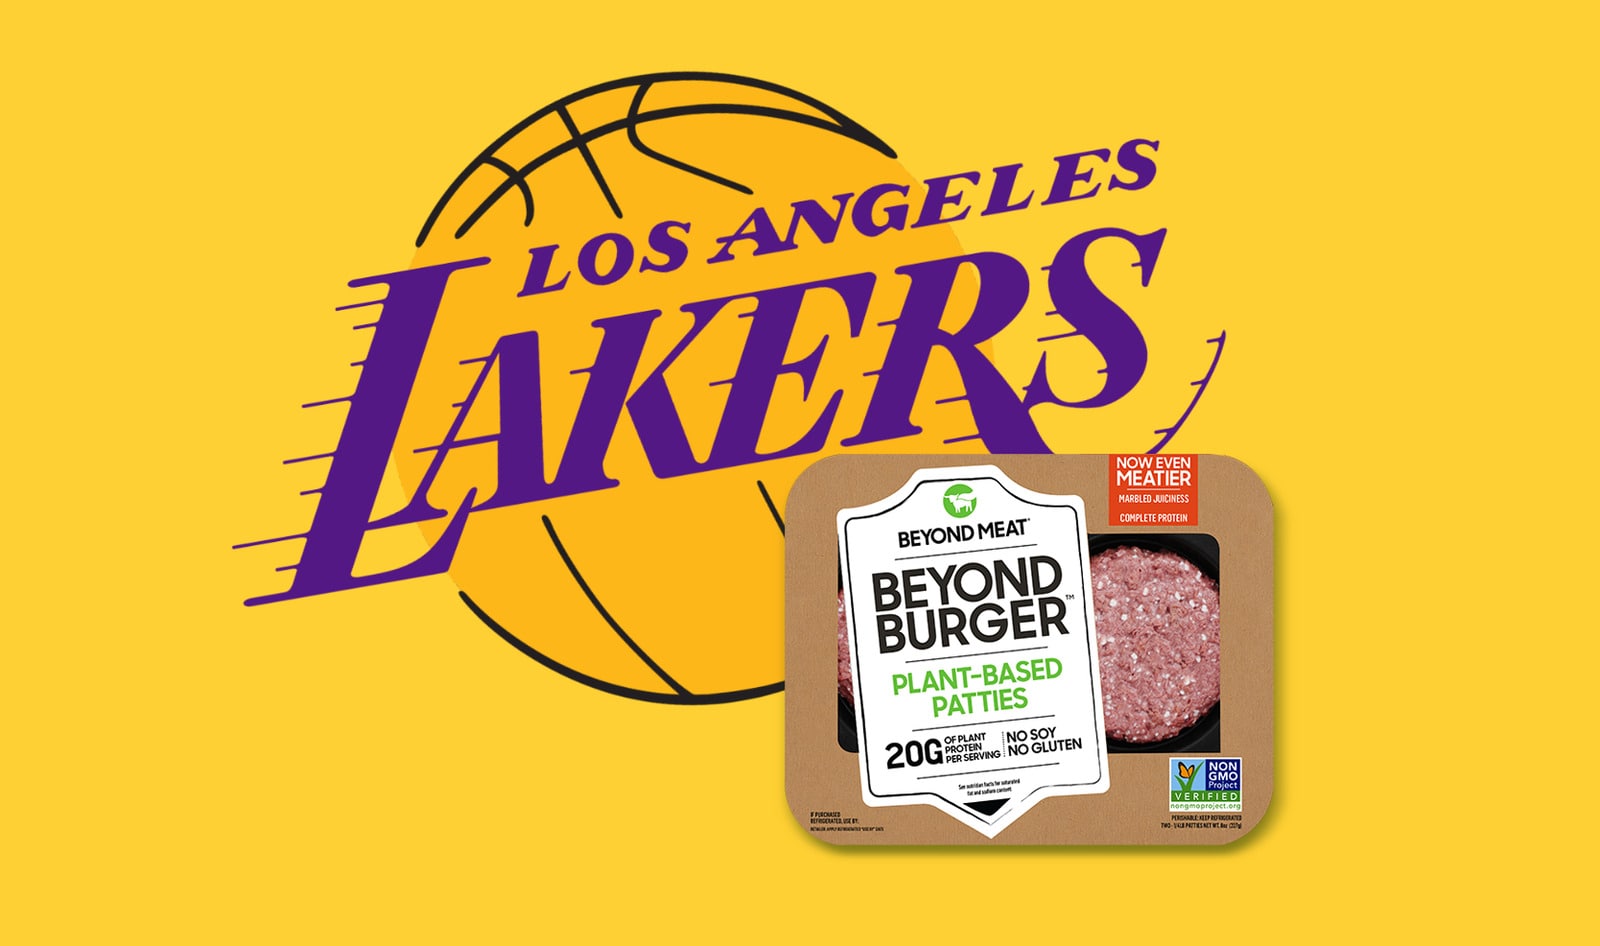 Los Angeles Lakers Partner with Beyond Meat